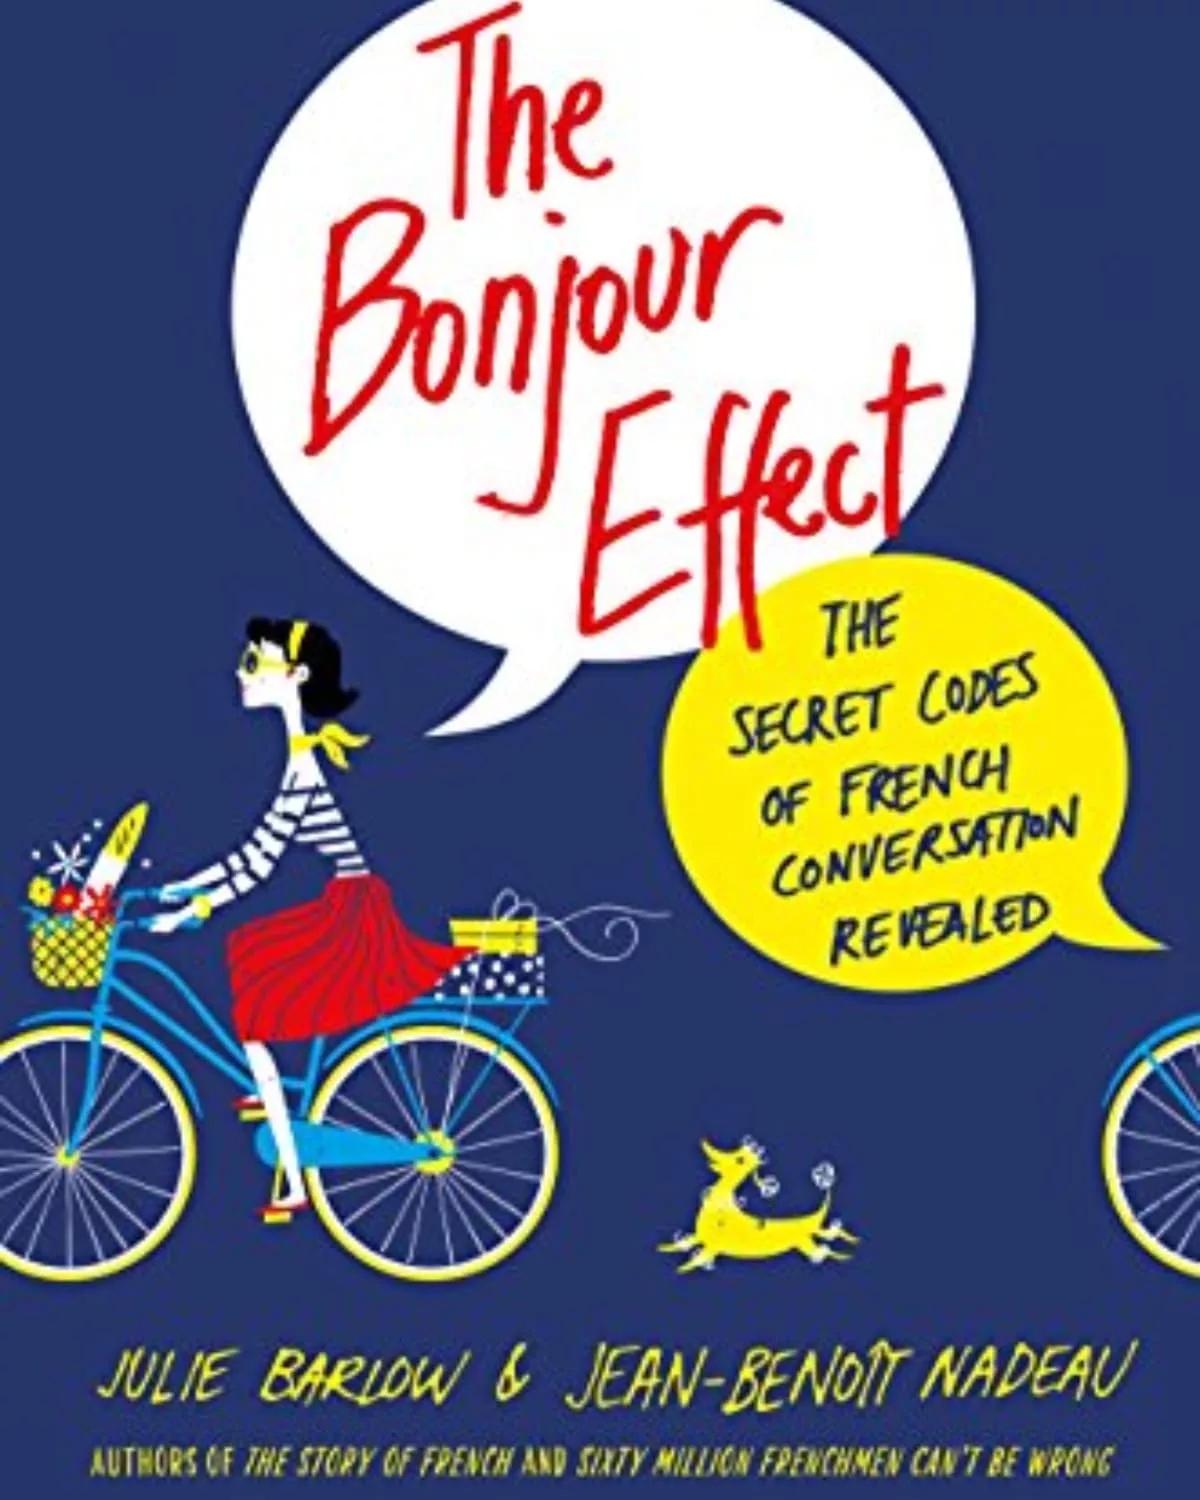 The Bonjour Effect book cover sketch of girl on bicycle